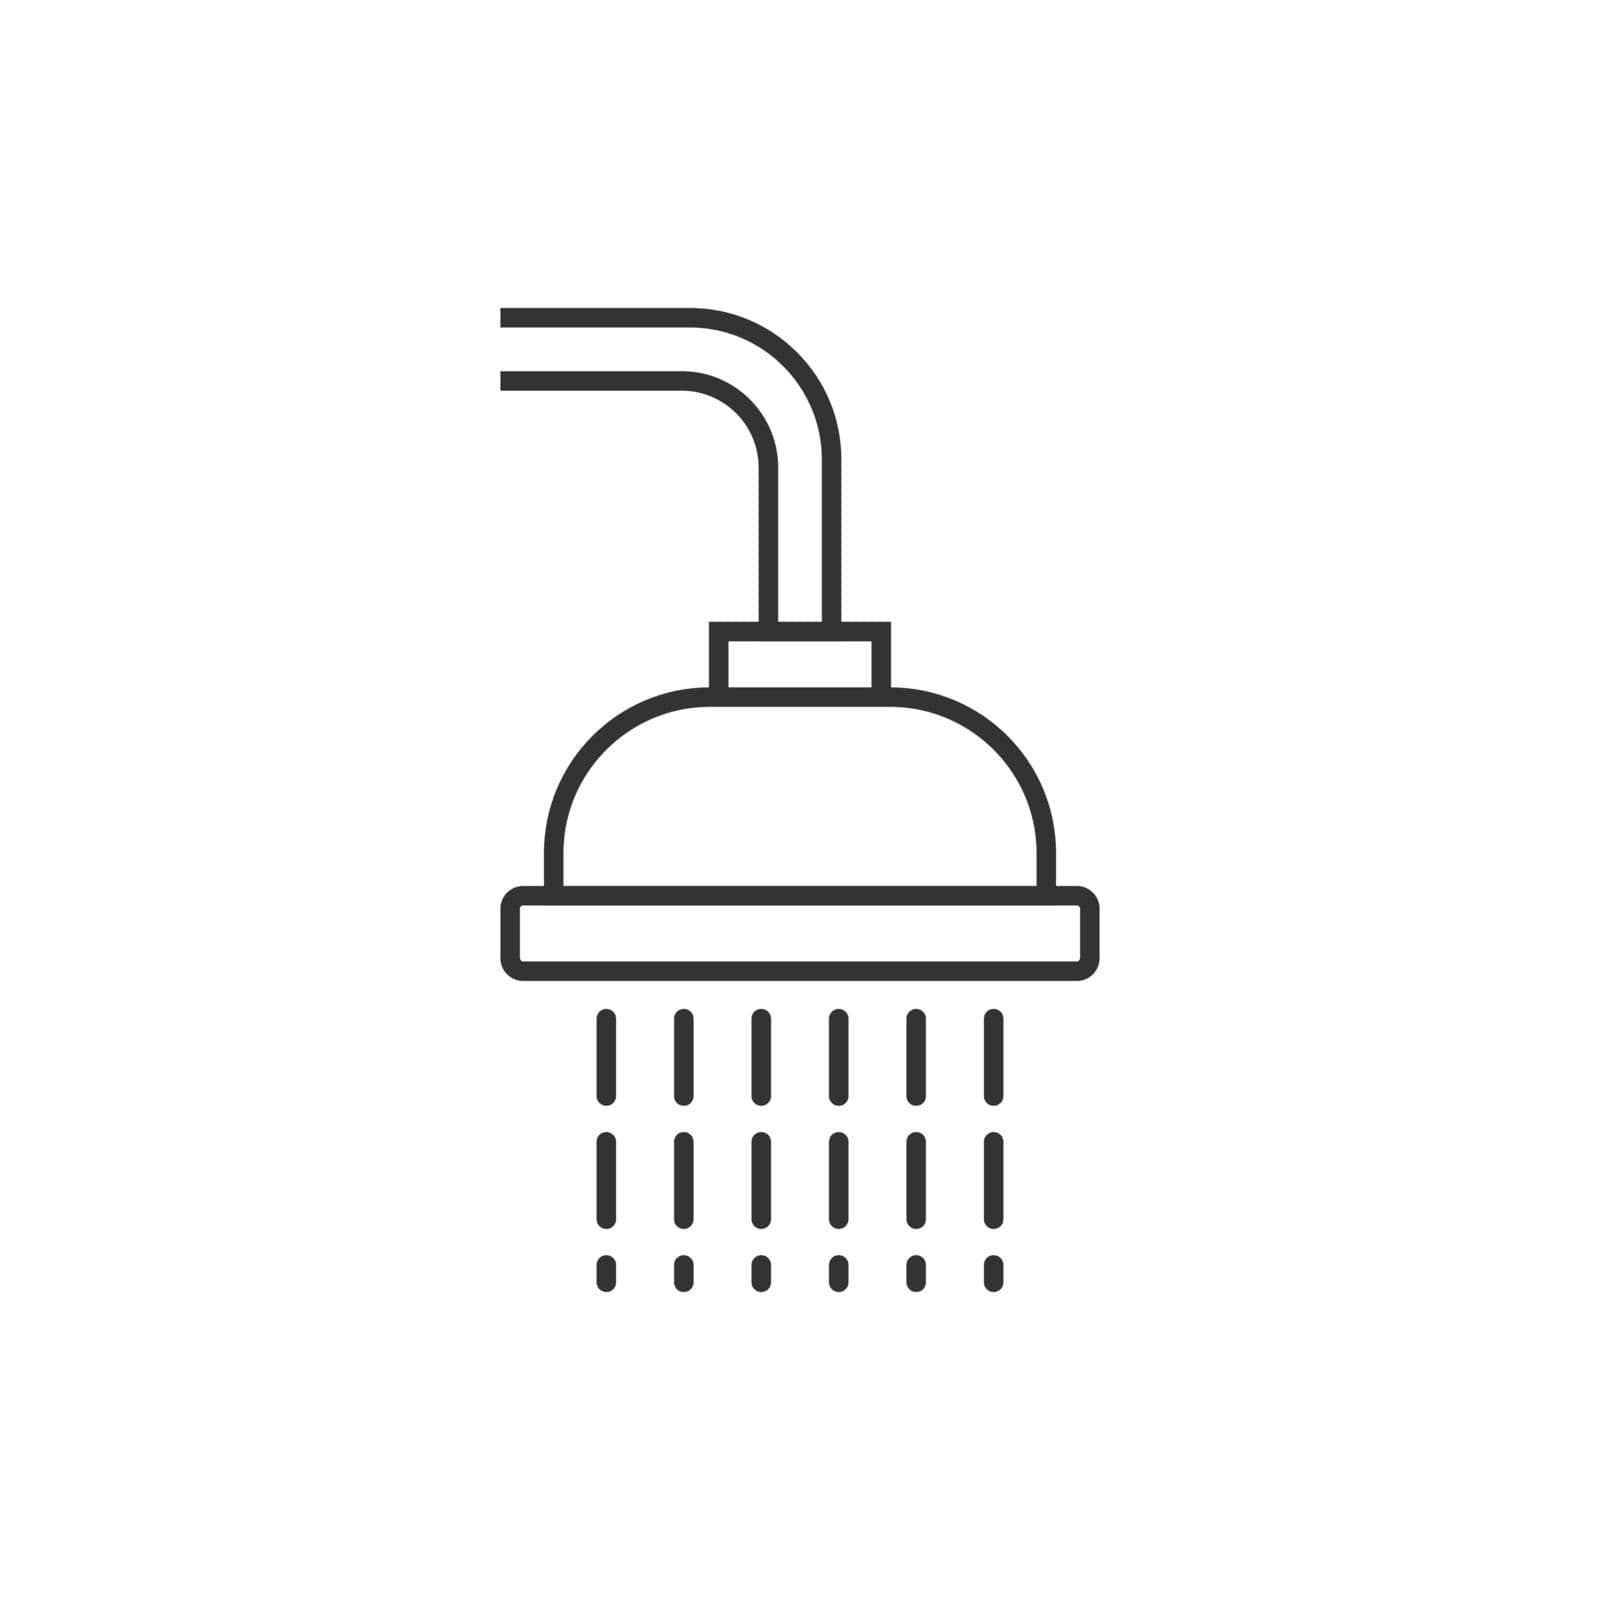 Shower head icon in flat style. Bathroom hygienic vector illustration on isolated background. Bathing sign business concept. by LysenkoA